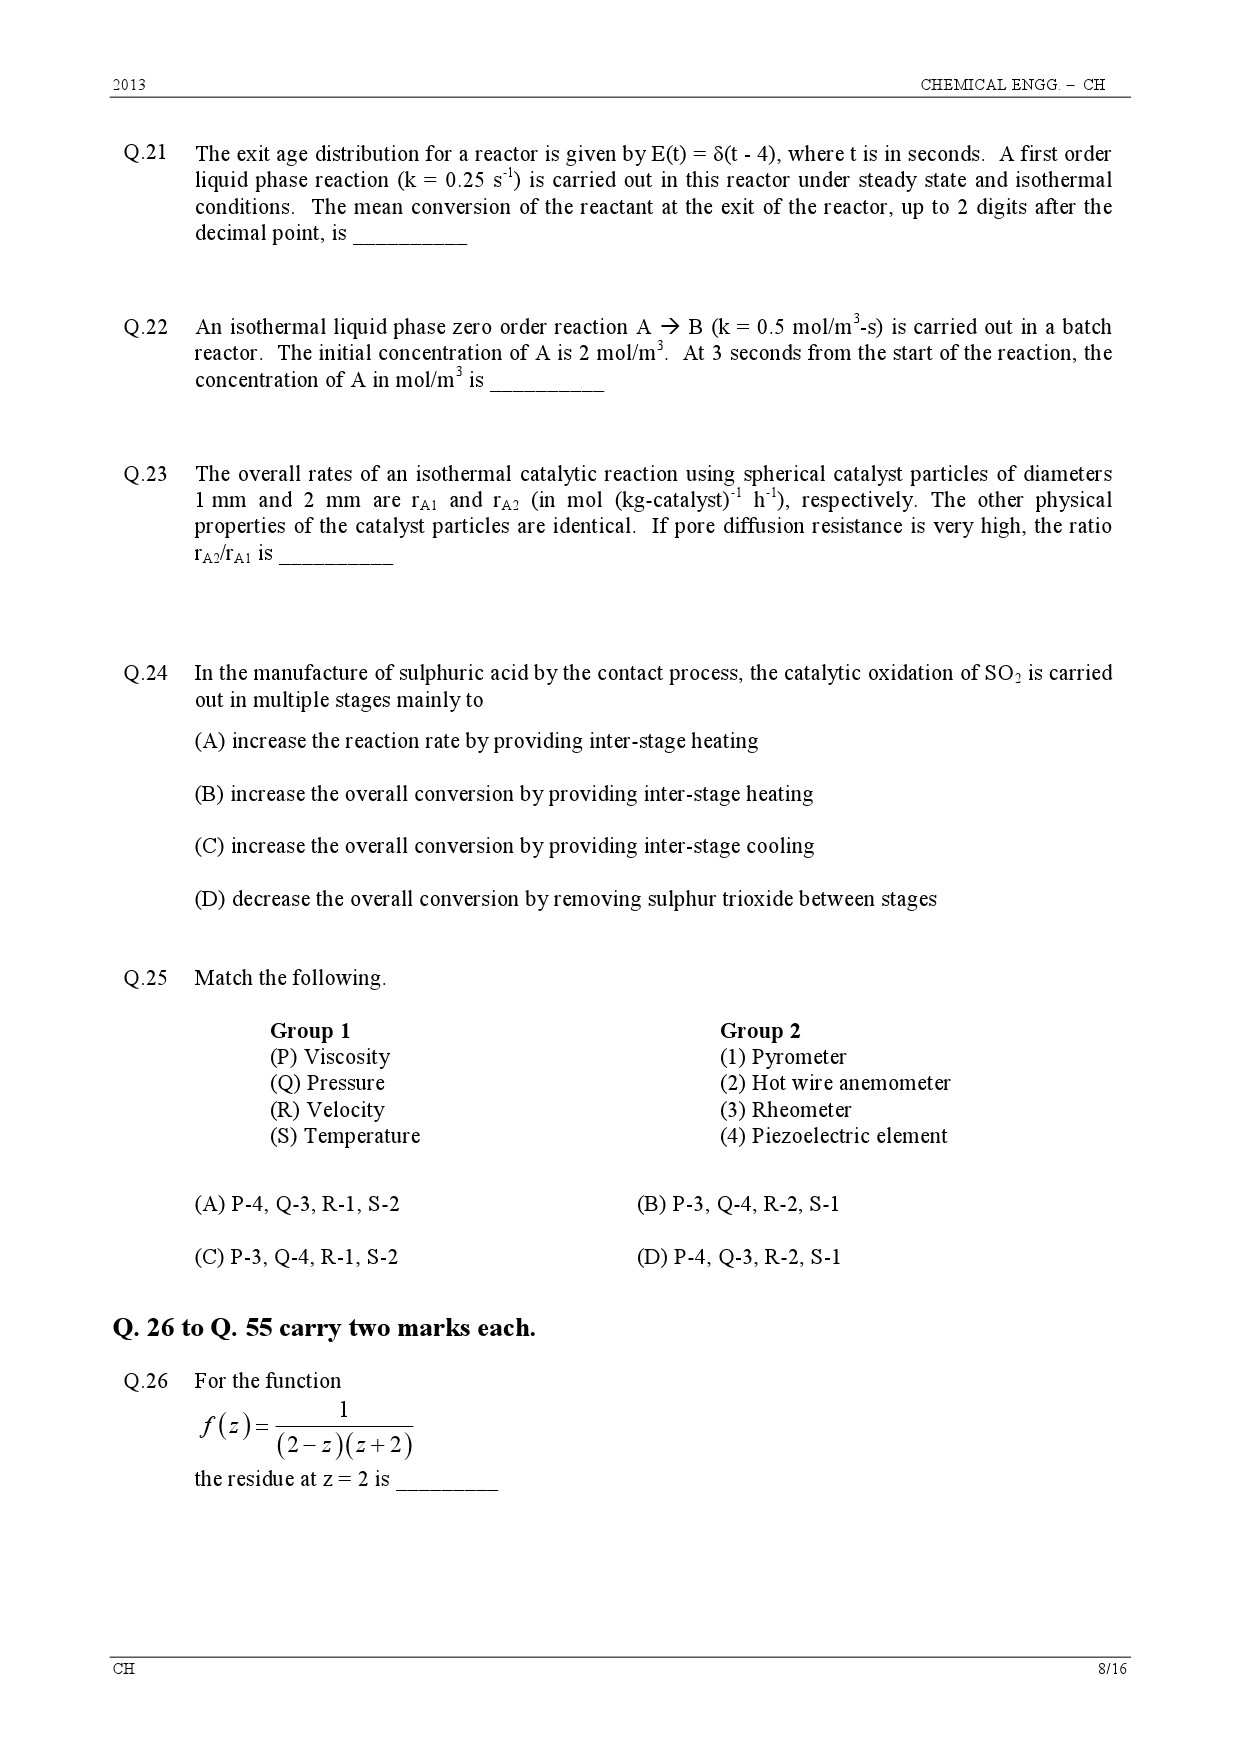 GATE Exam Question Paper 2013 Chemical Engineering 8